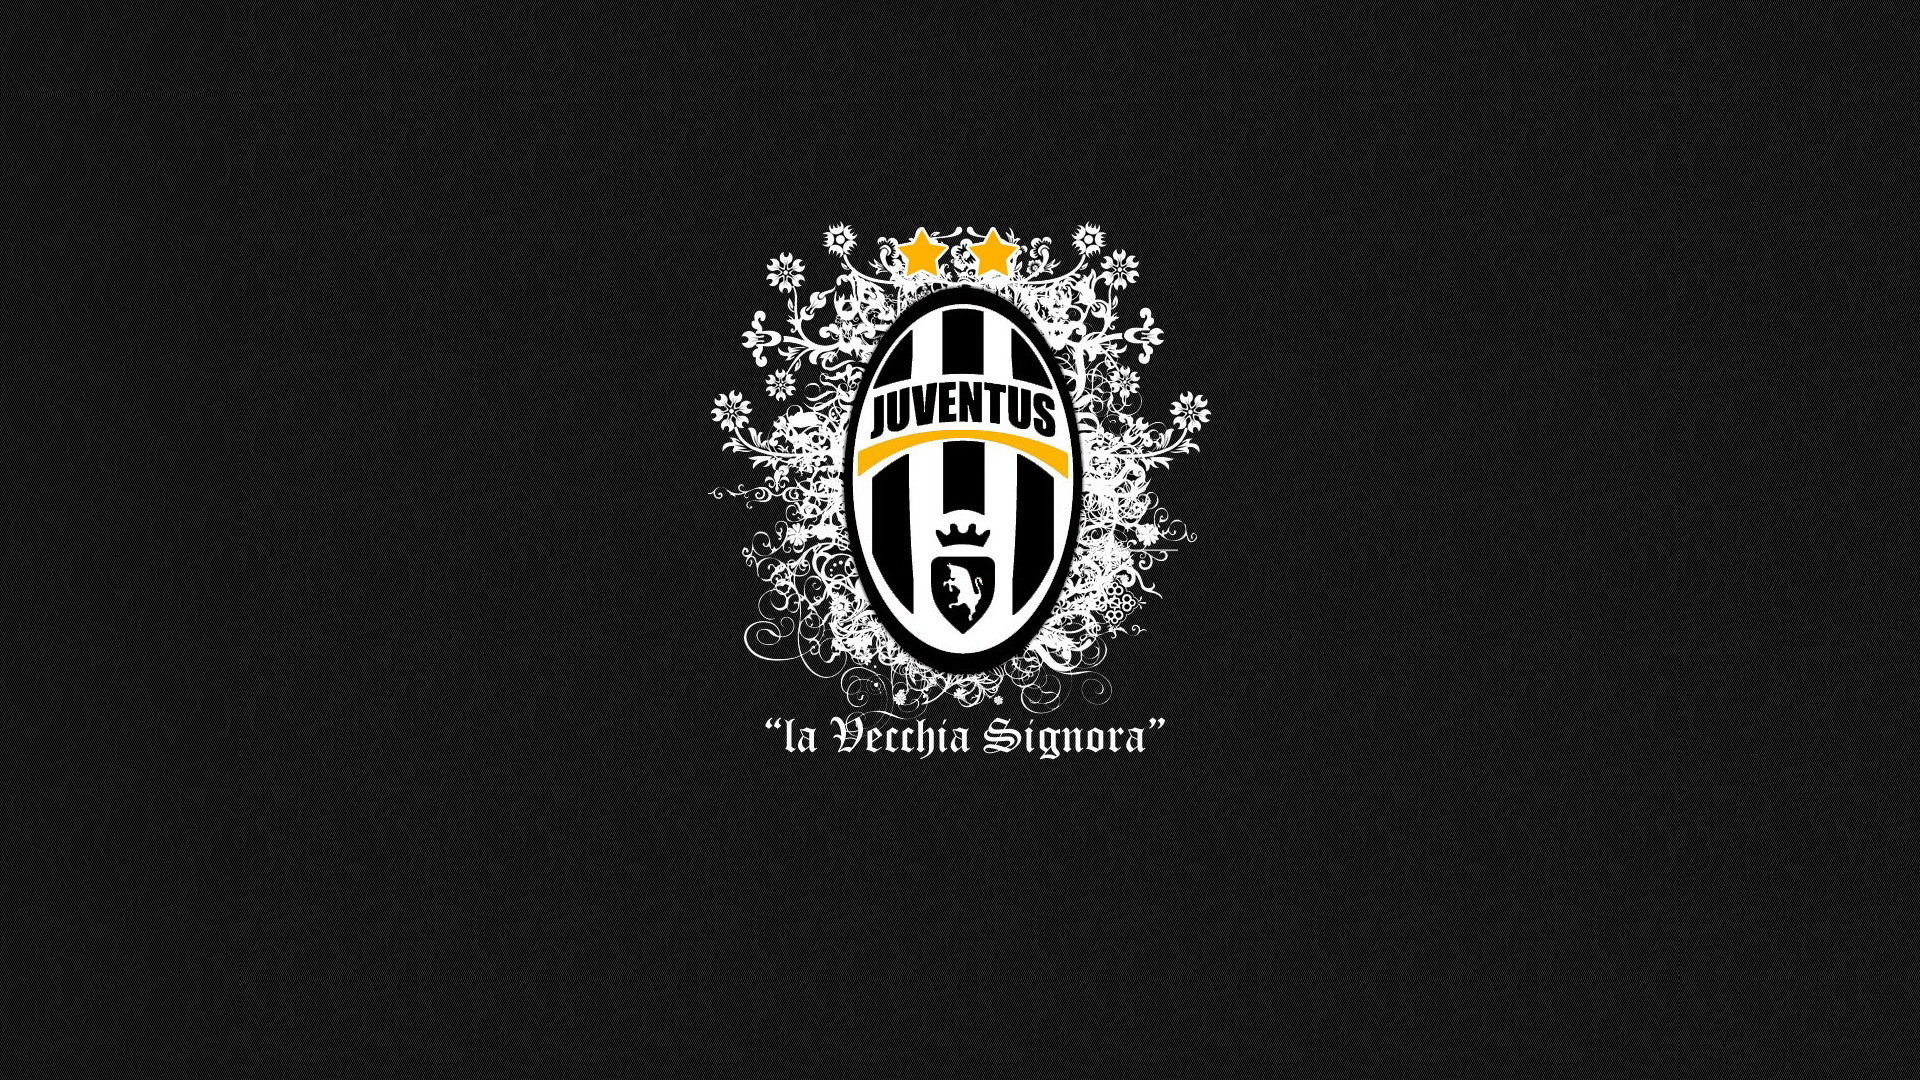 1920x1080 Badge of Juventus Background and Windows 8.1 Themes